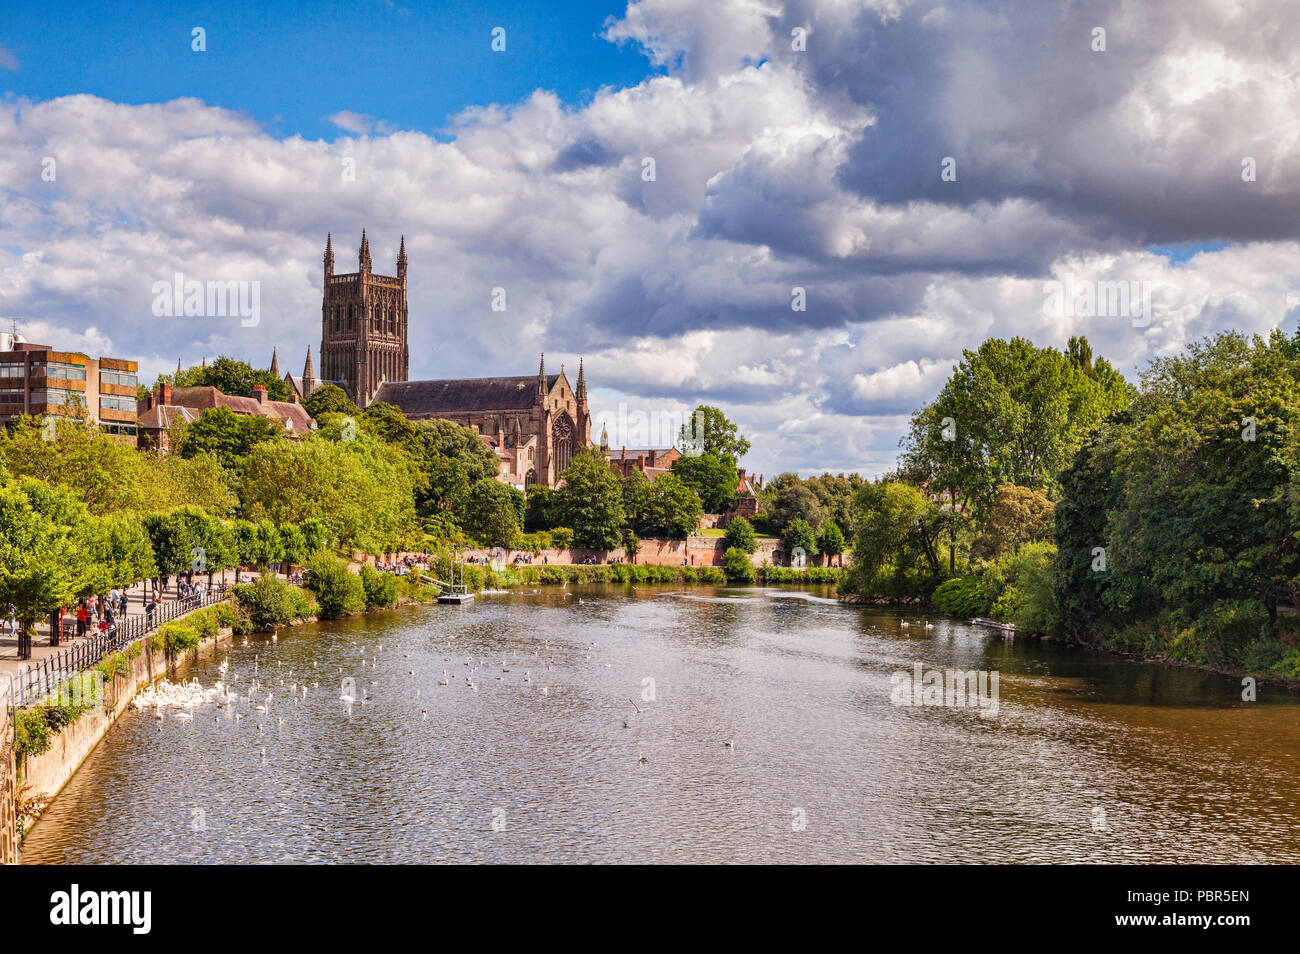 Cattedrale di Worcester e il fiume Severn, Worcester, Worcestershire, Inghilterra Foto Stock